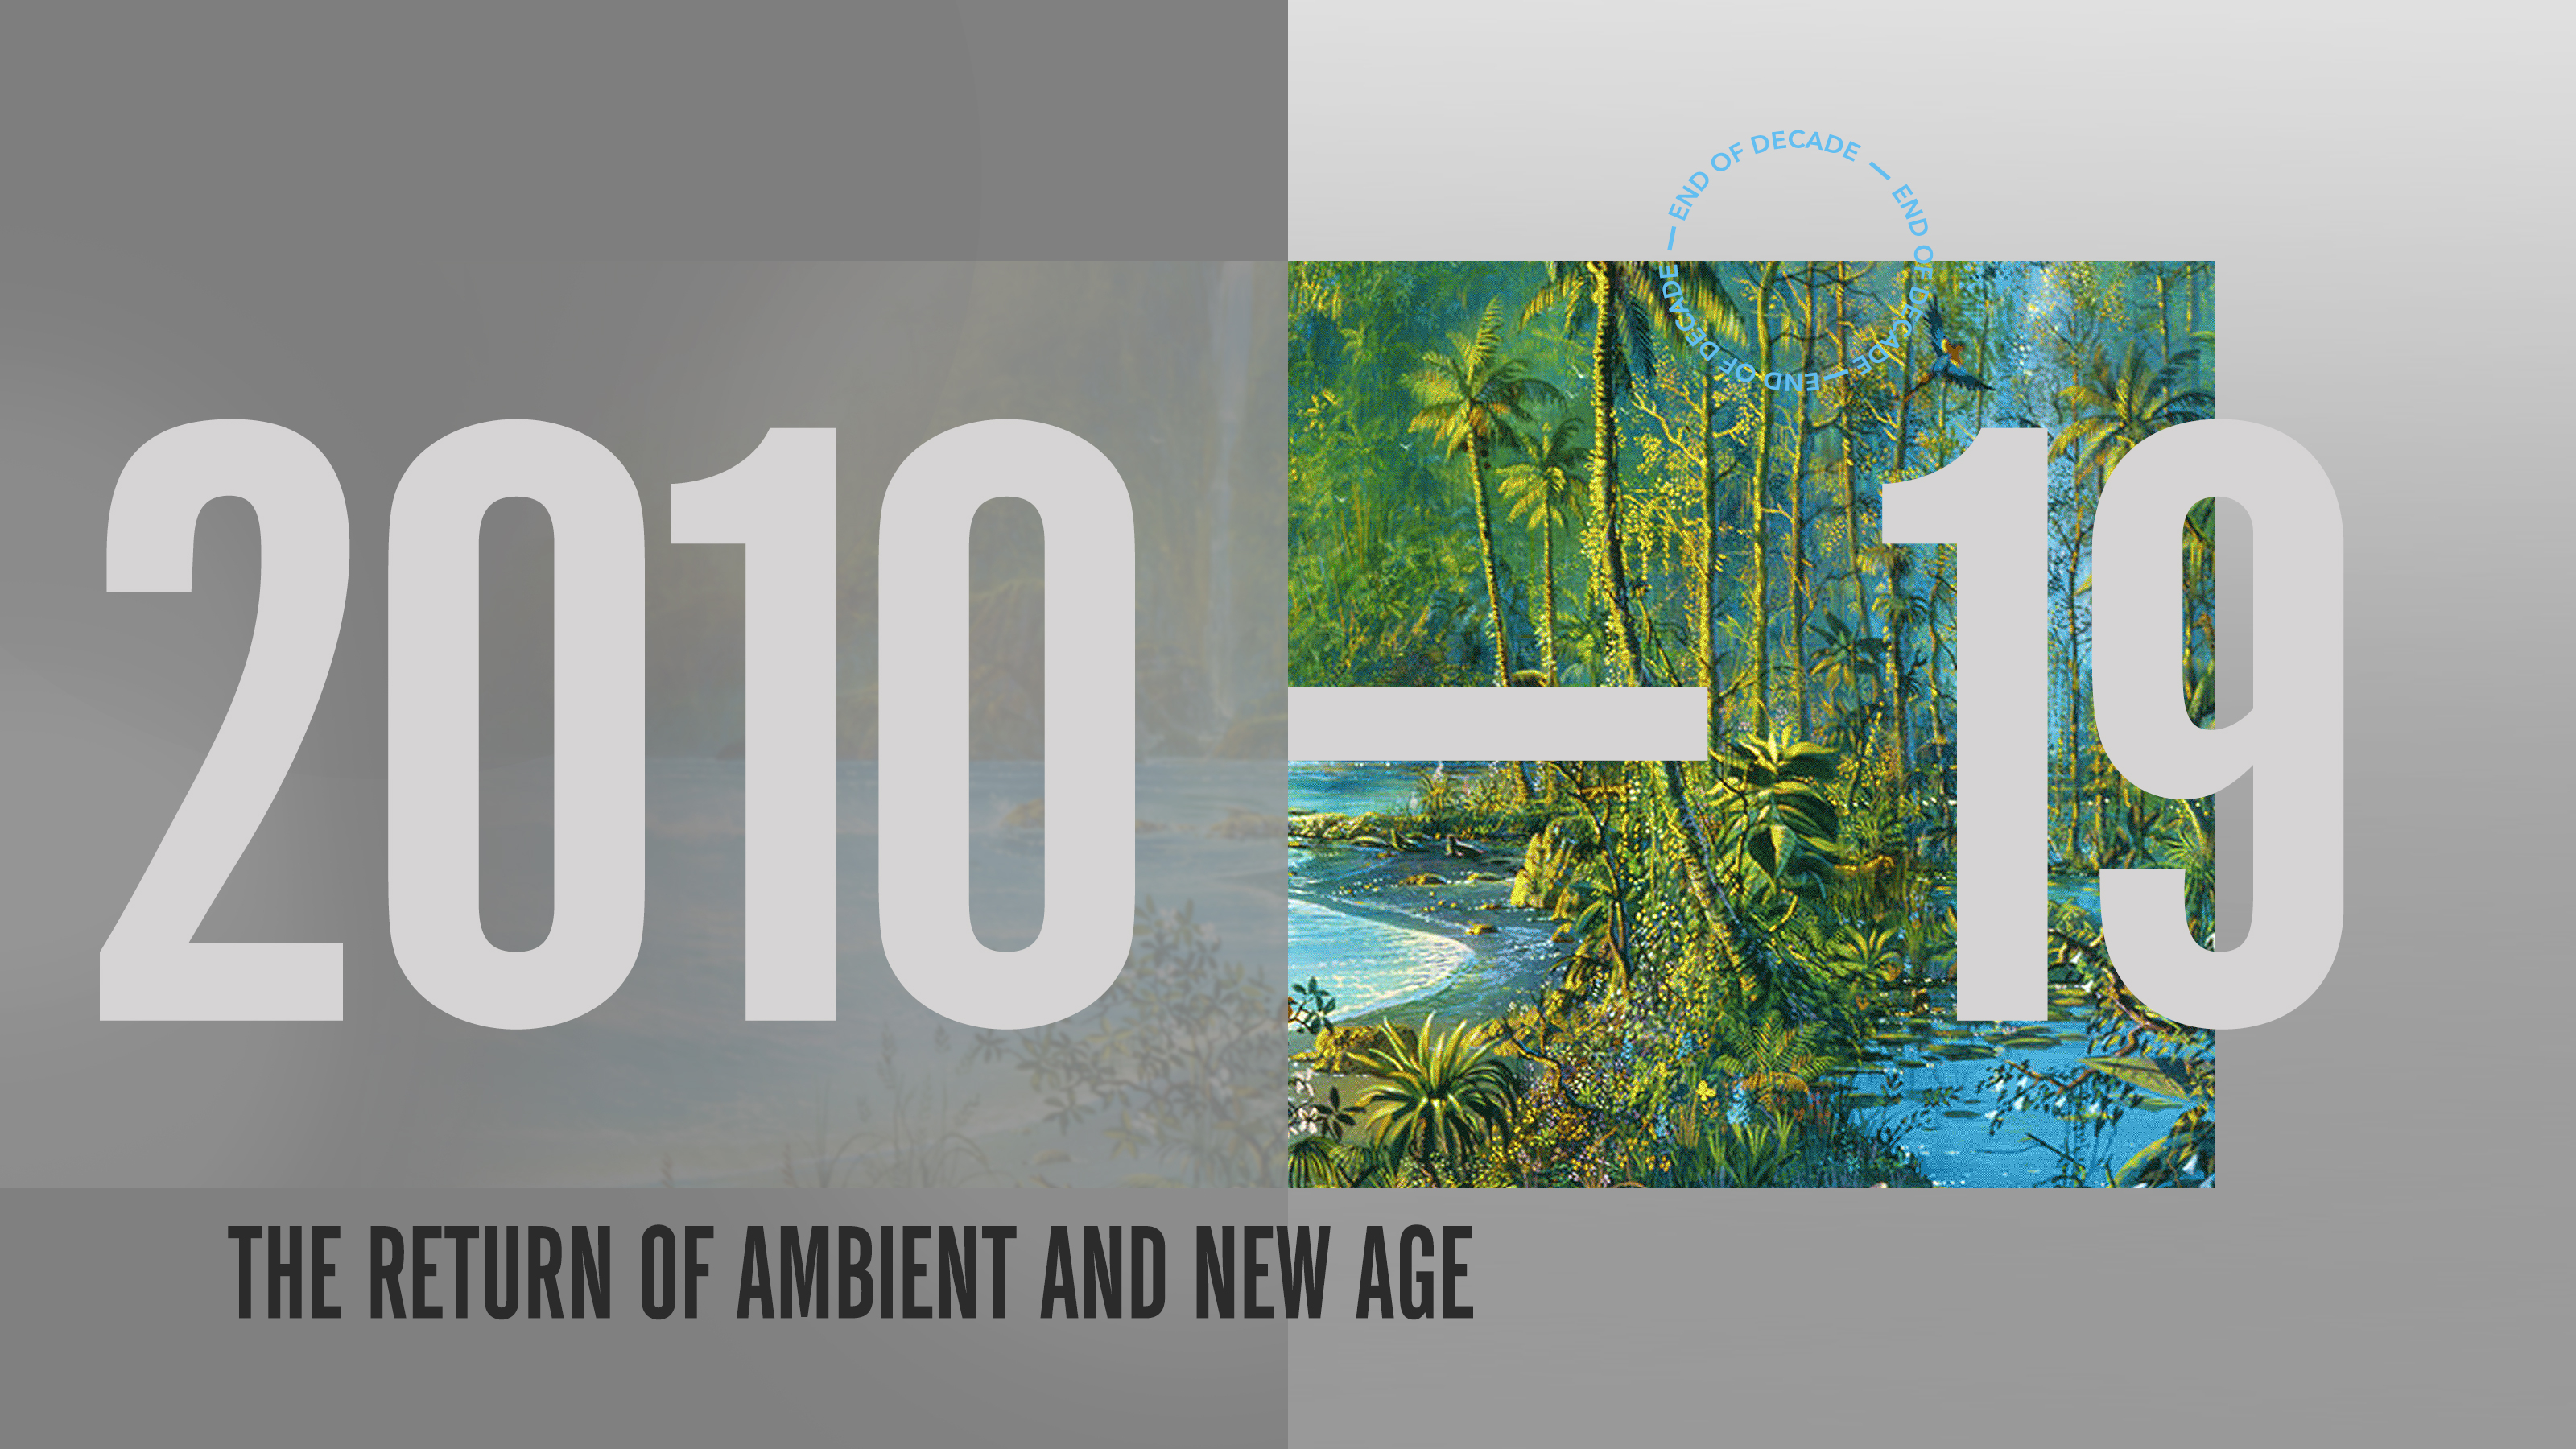 Ra 2010 19 Back To The Garden The Return Of Ambient And New Age